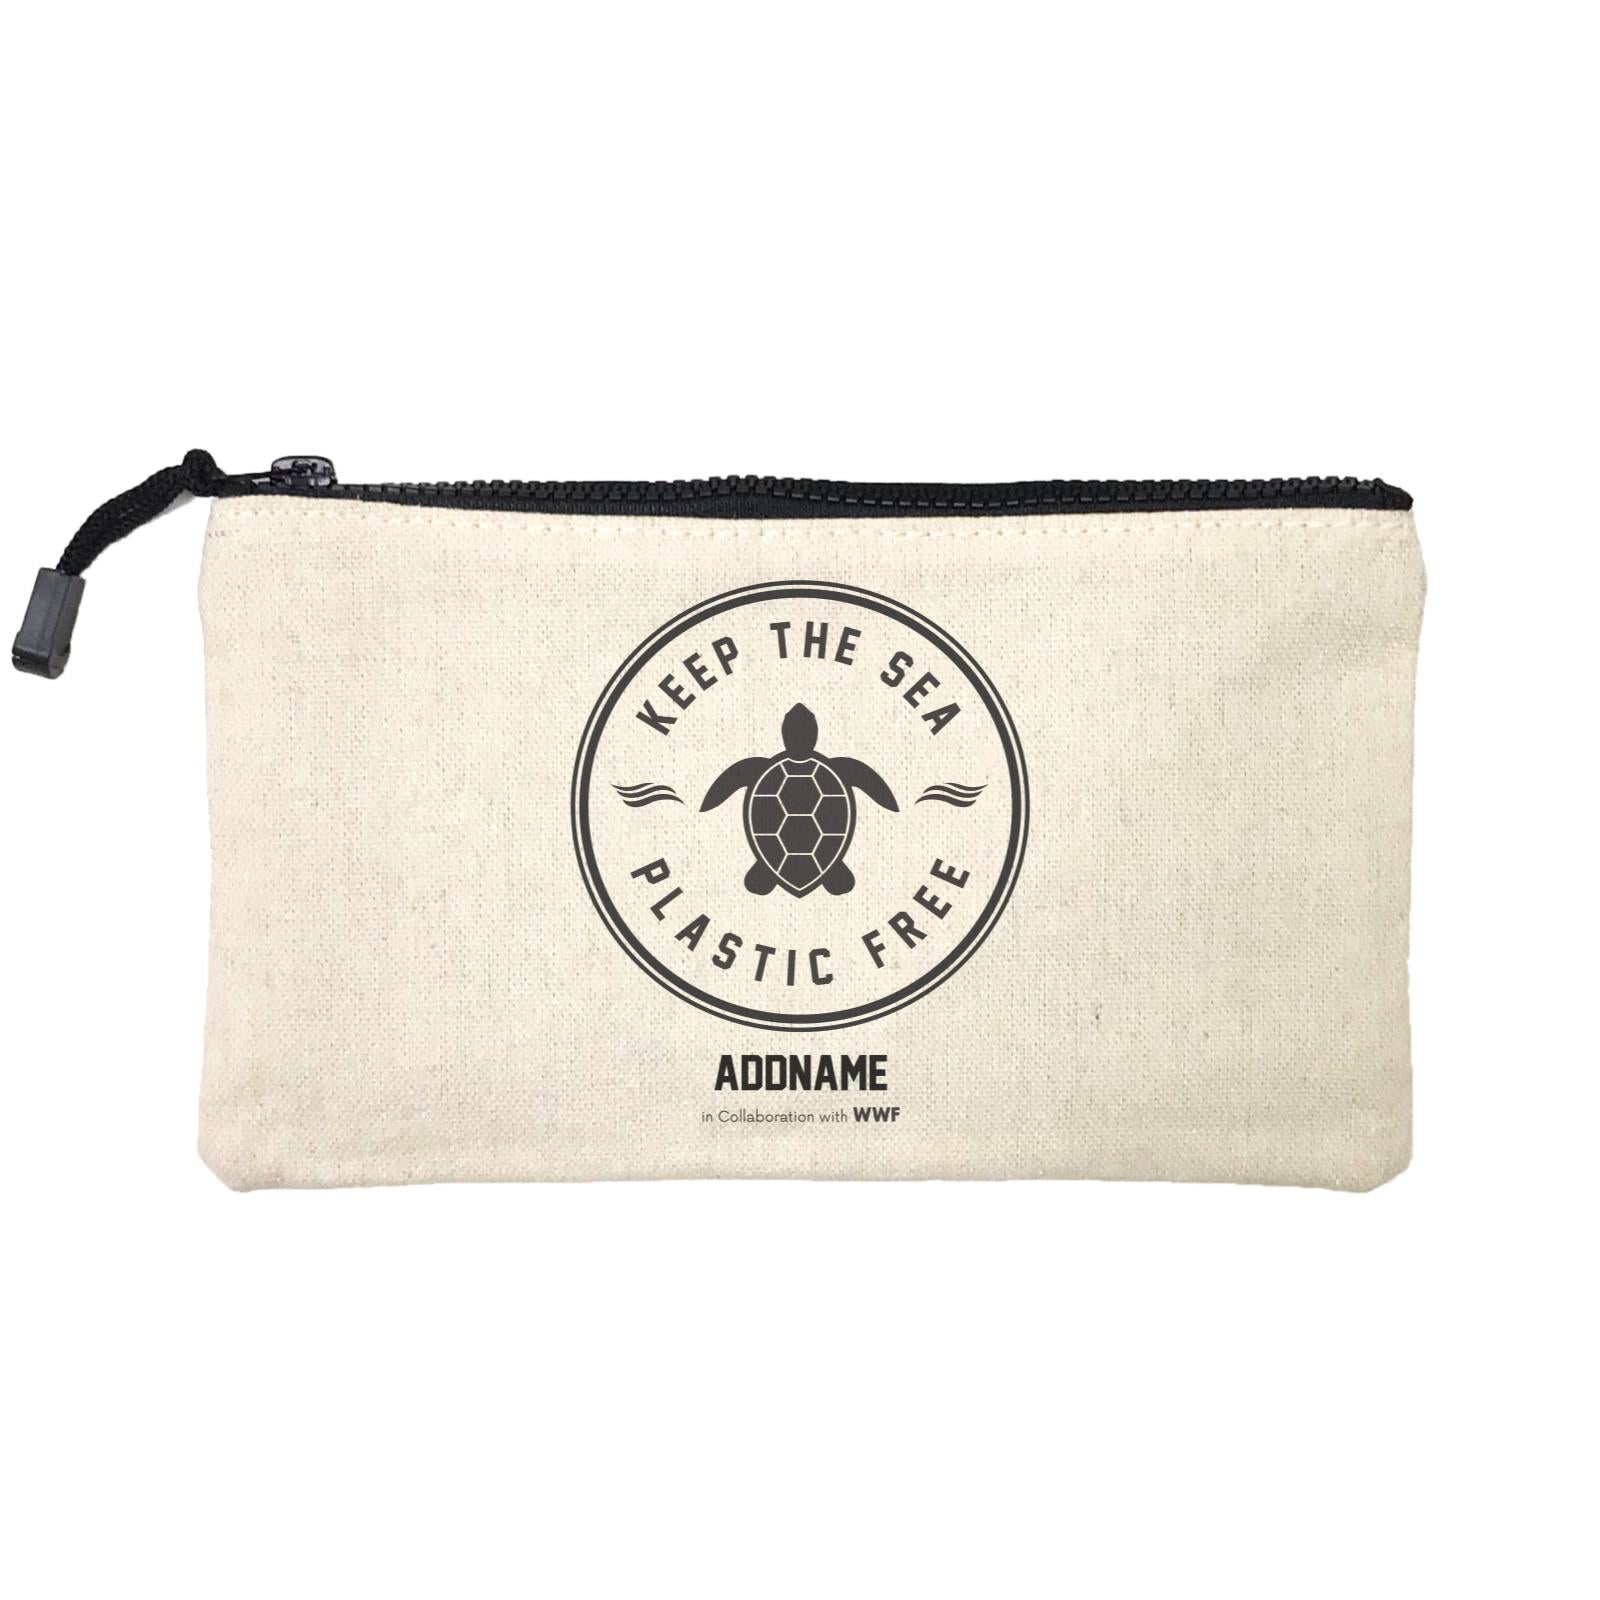 Keep The Sea Plastic Free Turtle Stamp Addname Mini Accessories Stationery Pouch